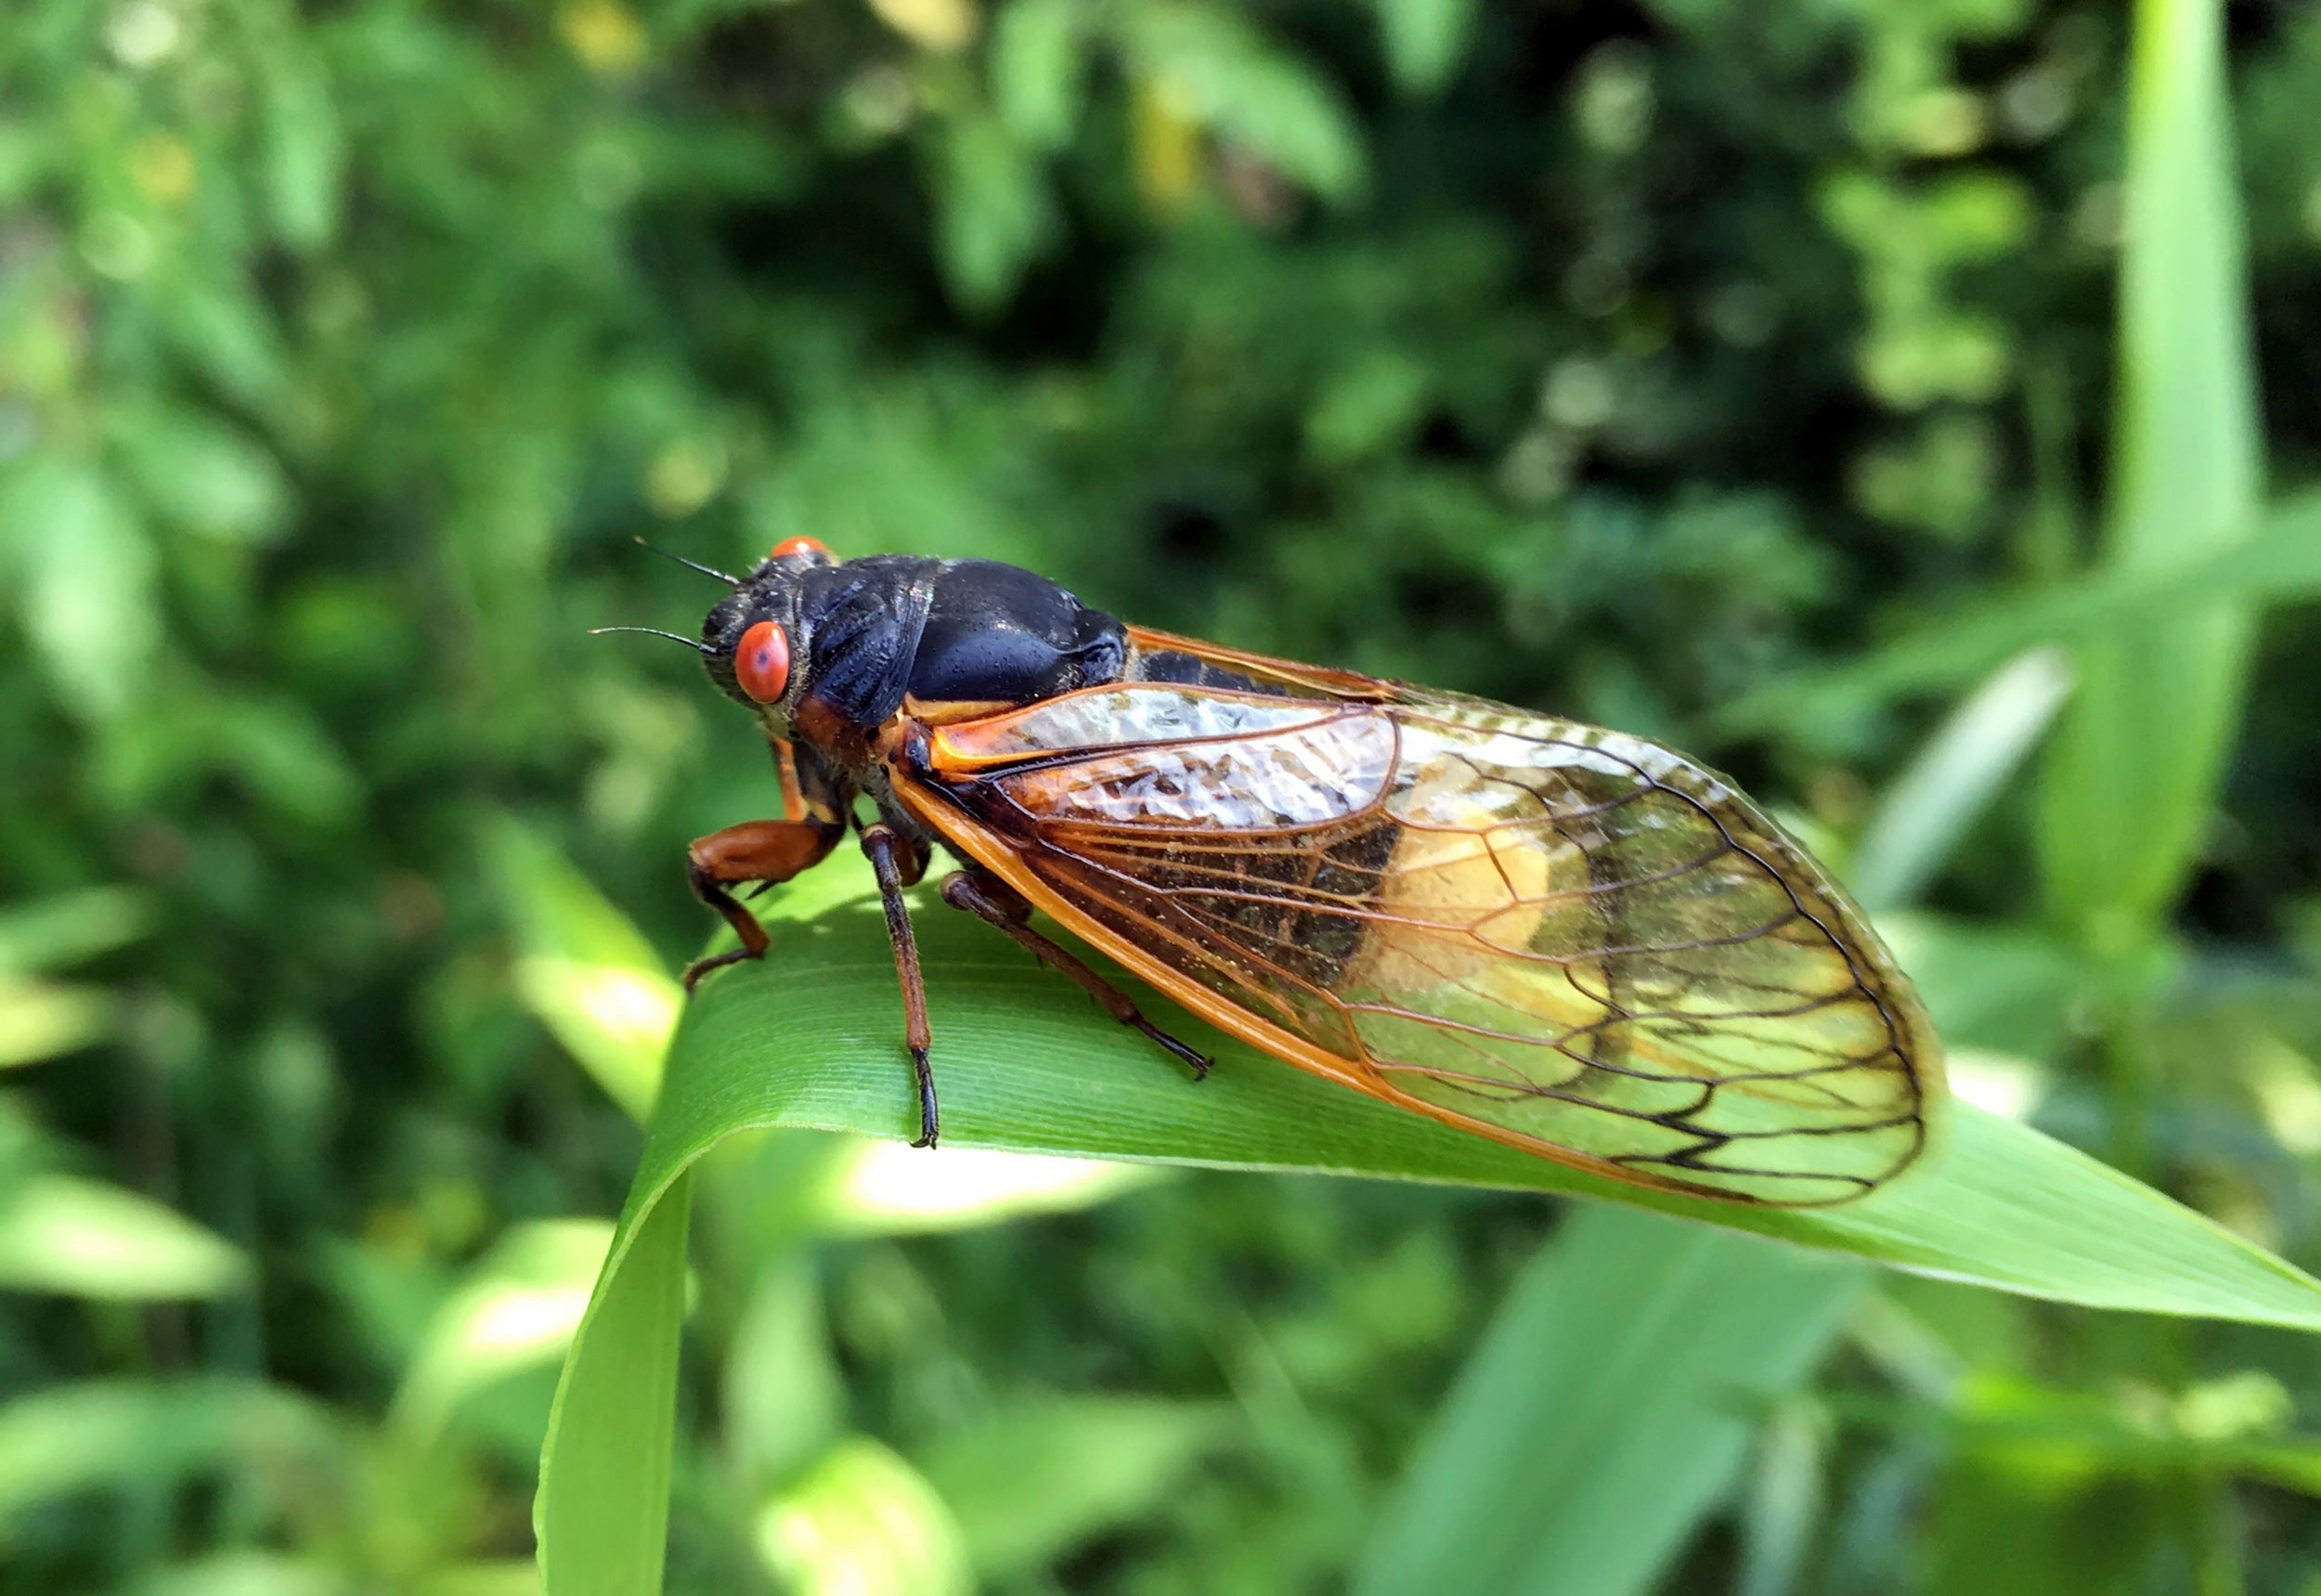 A newly infected periodical cicada at Powdermill Nature Reserve in Westmoreland County